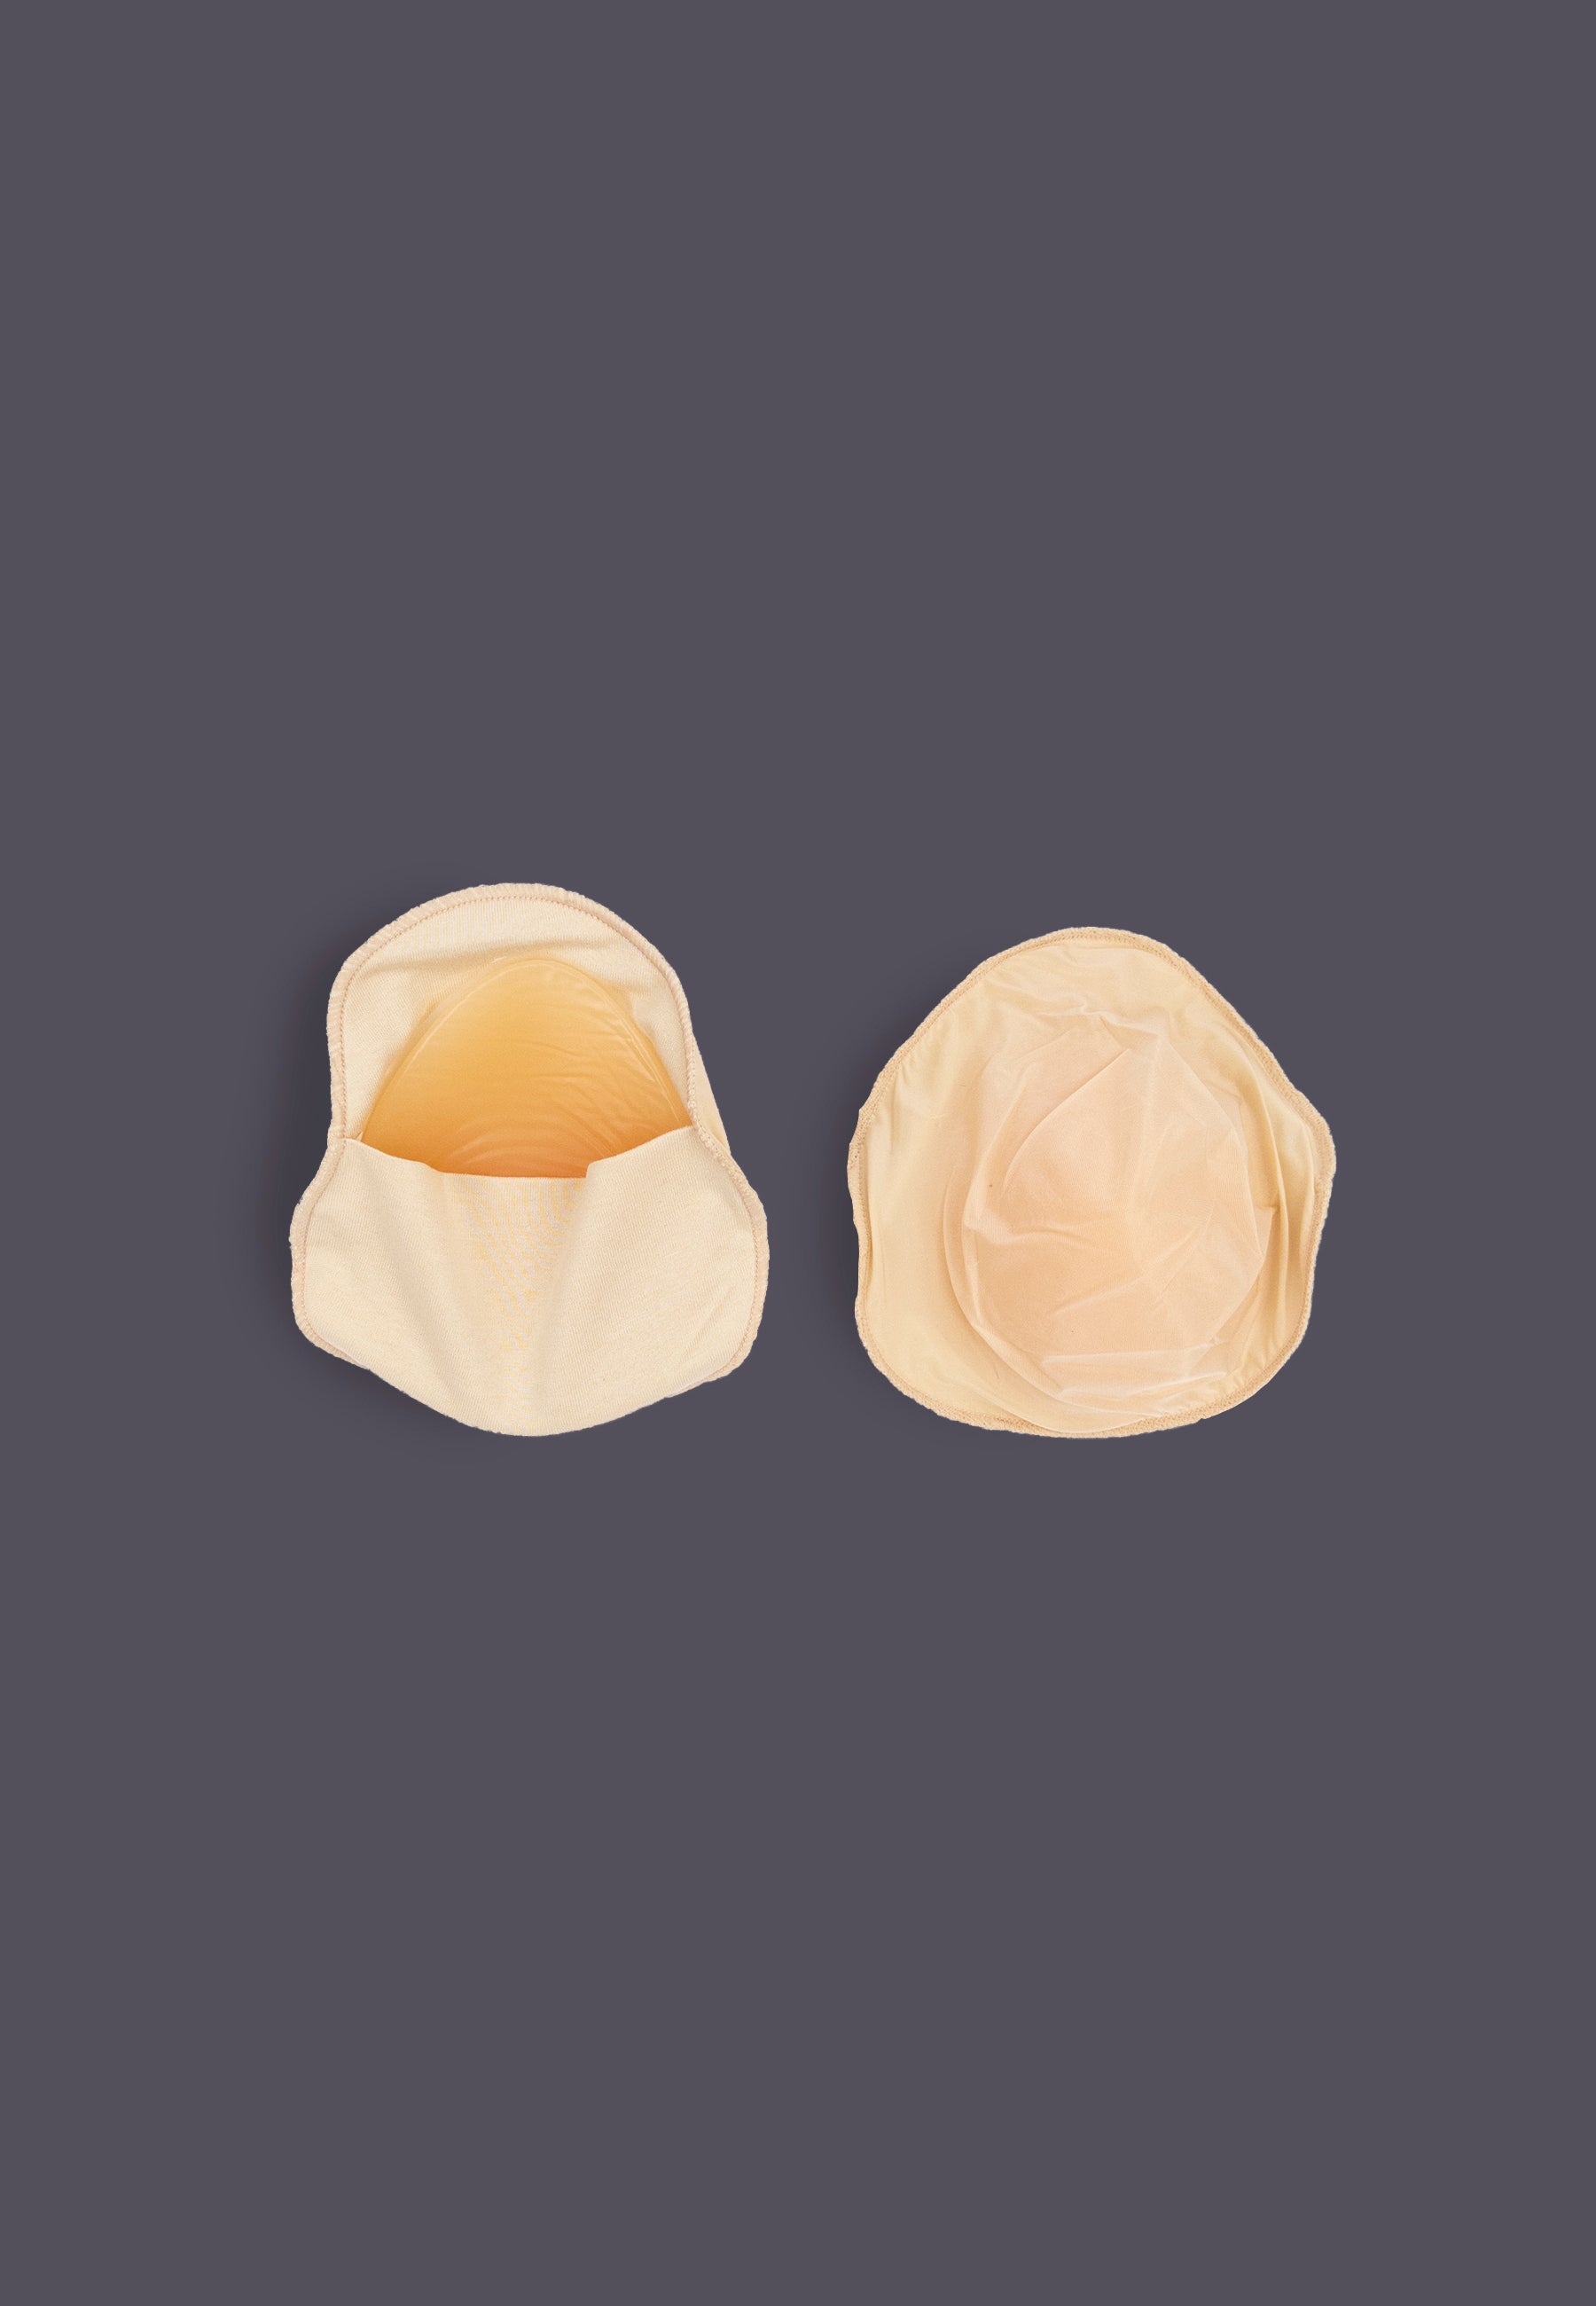 Prosthetic Pocket beige with two protheses inserted